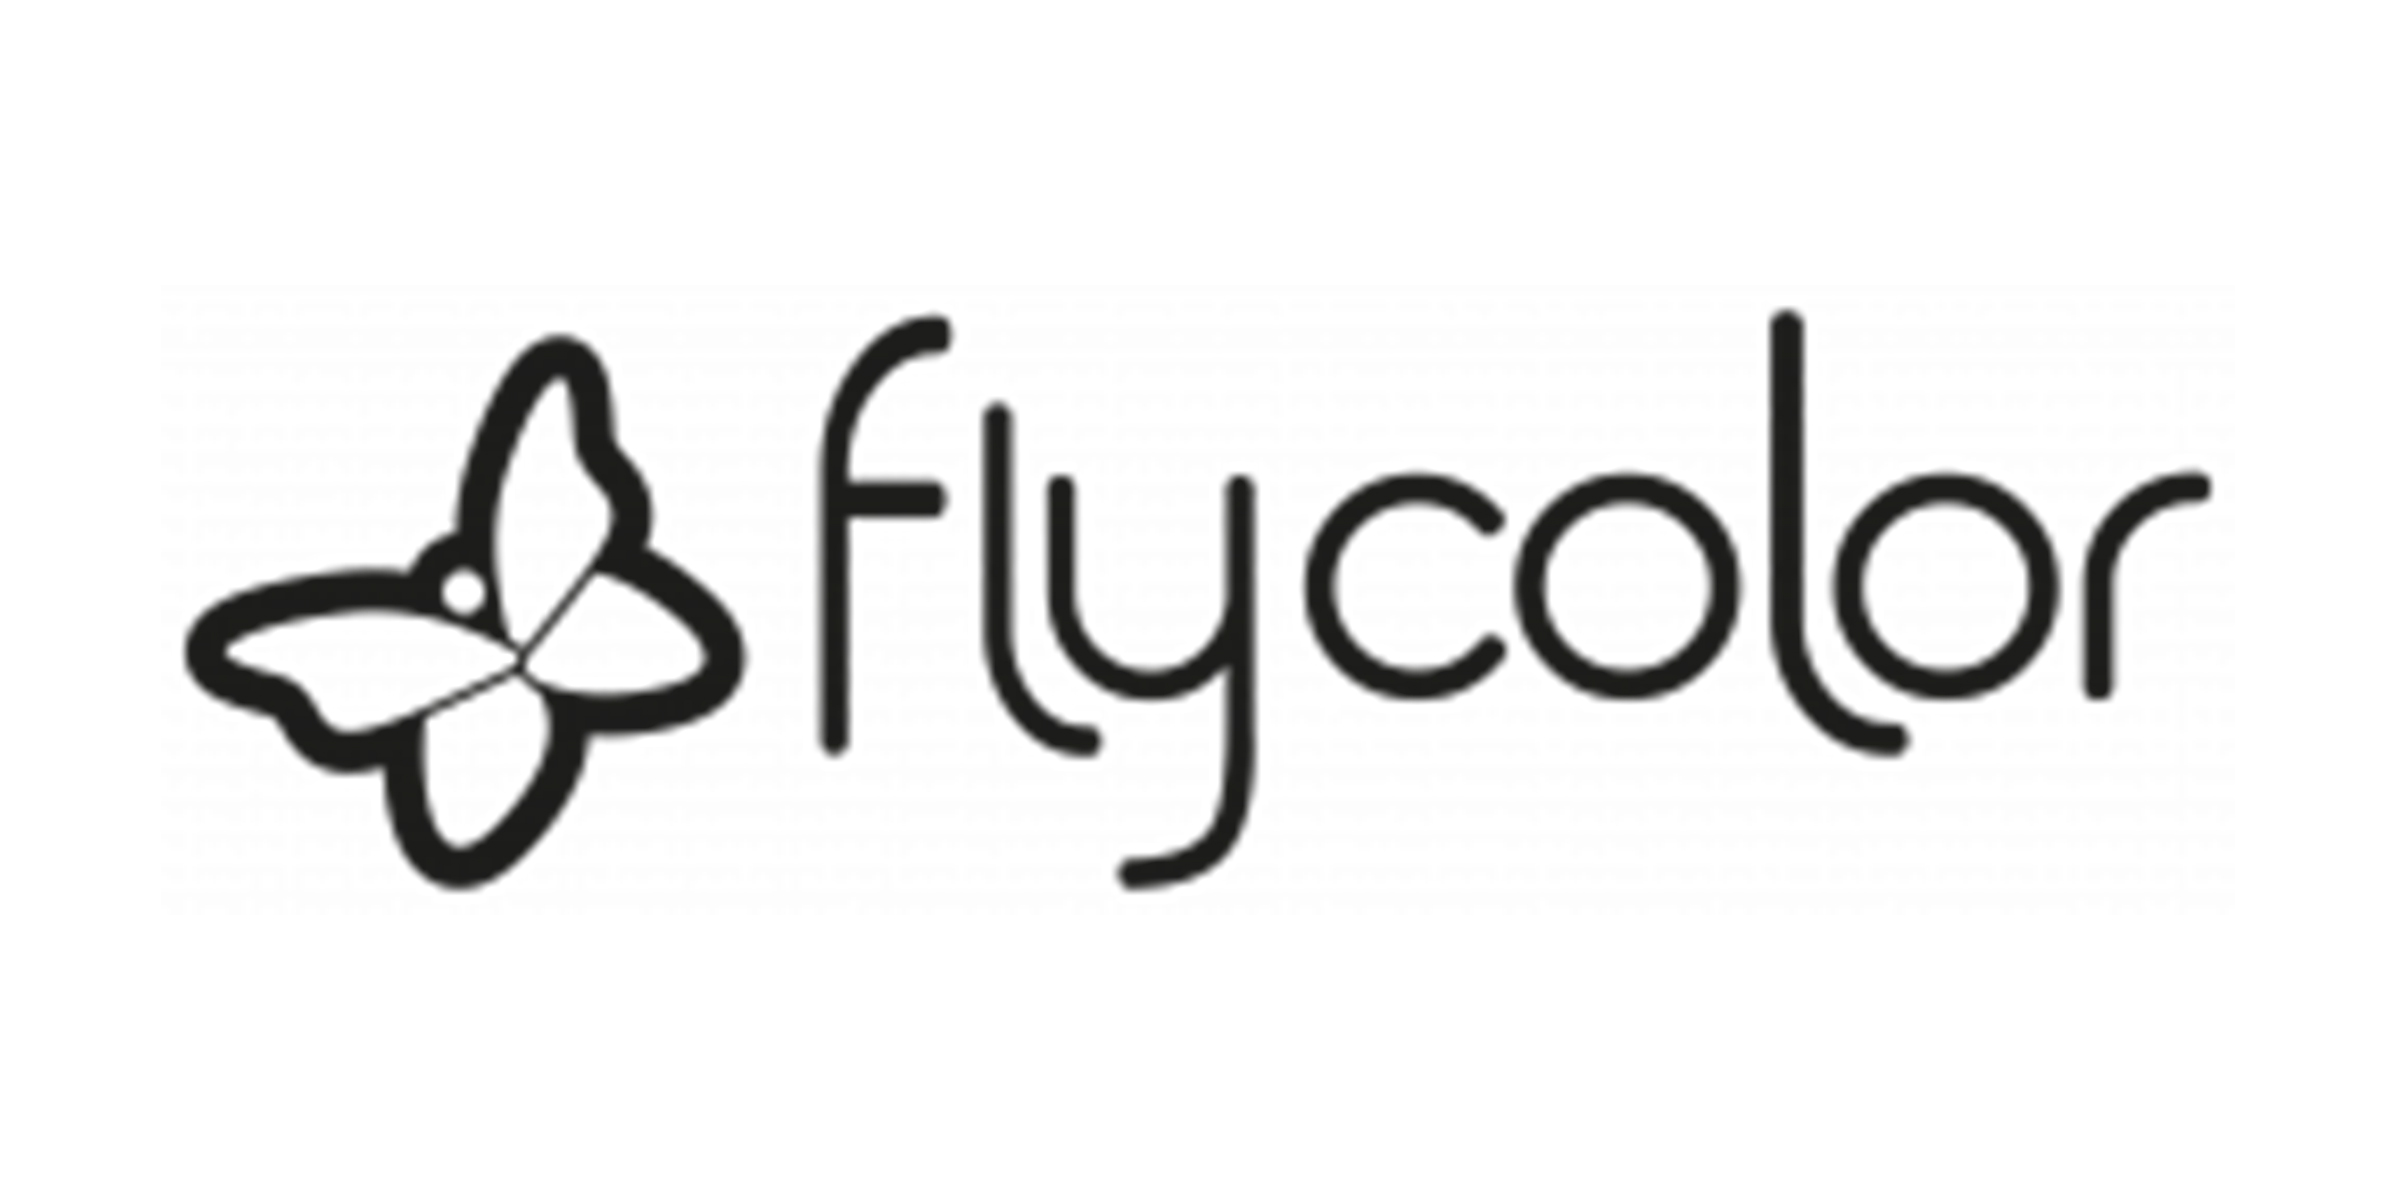 Fly Color